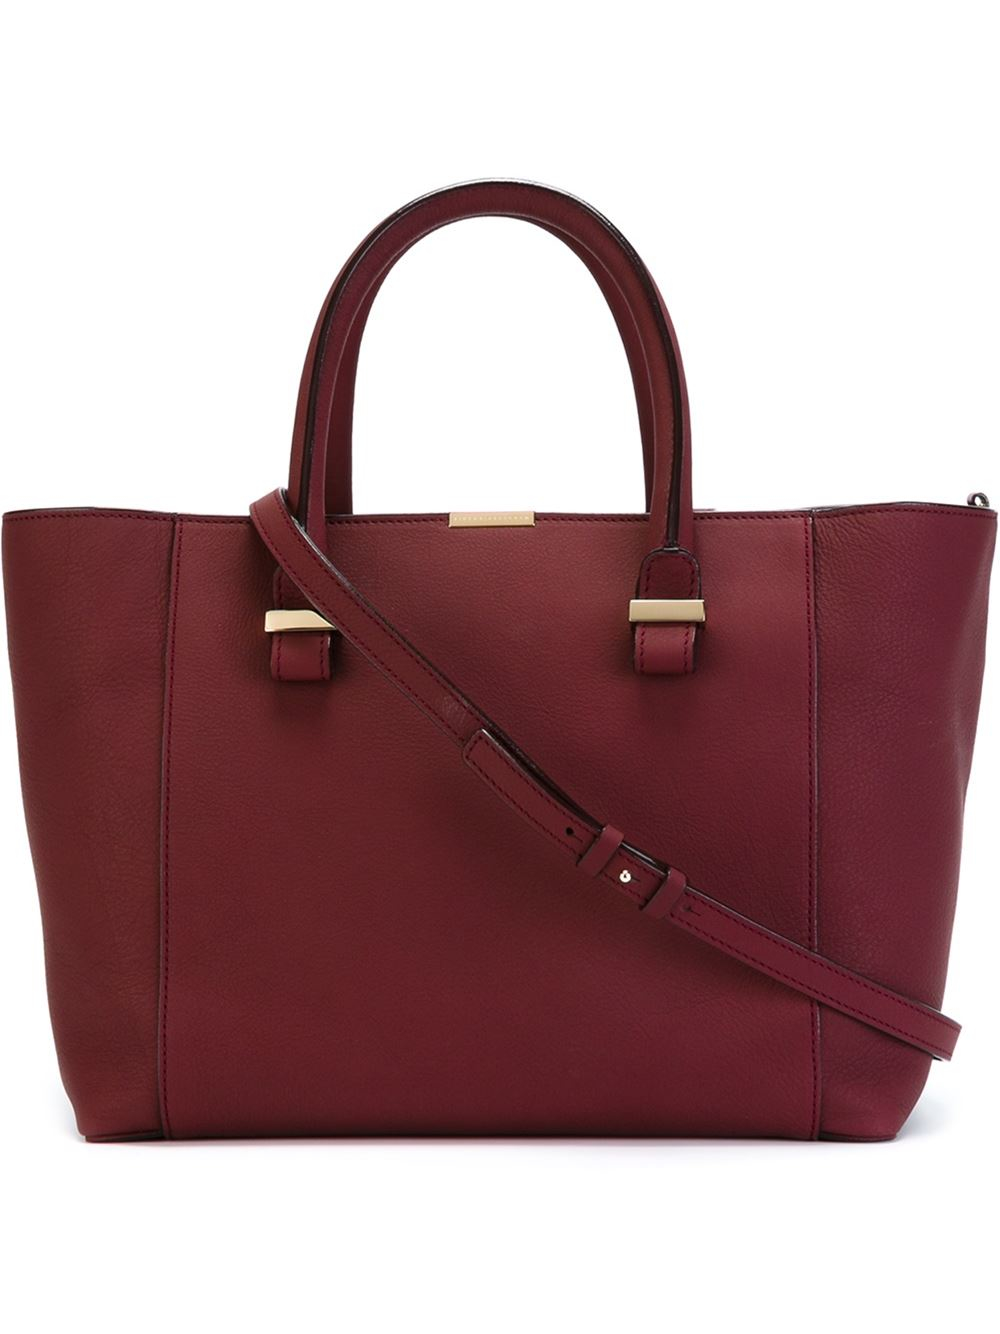 Lyst - Victoria Beckham Quincy Tote Bag in Red